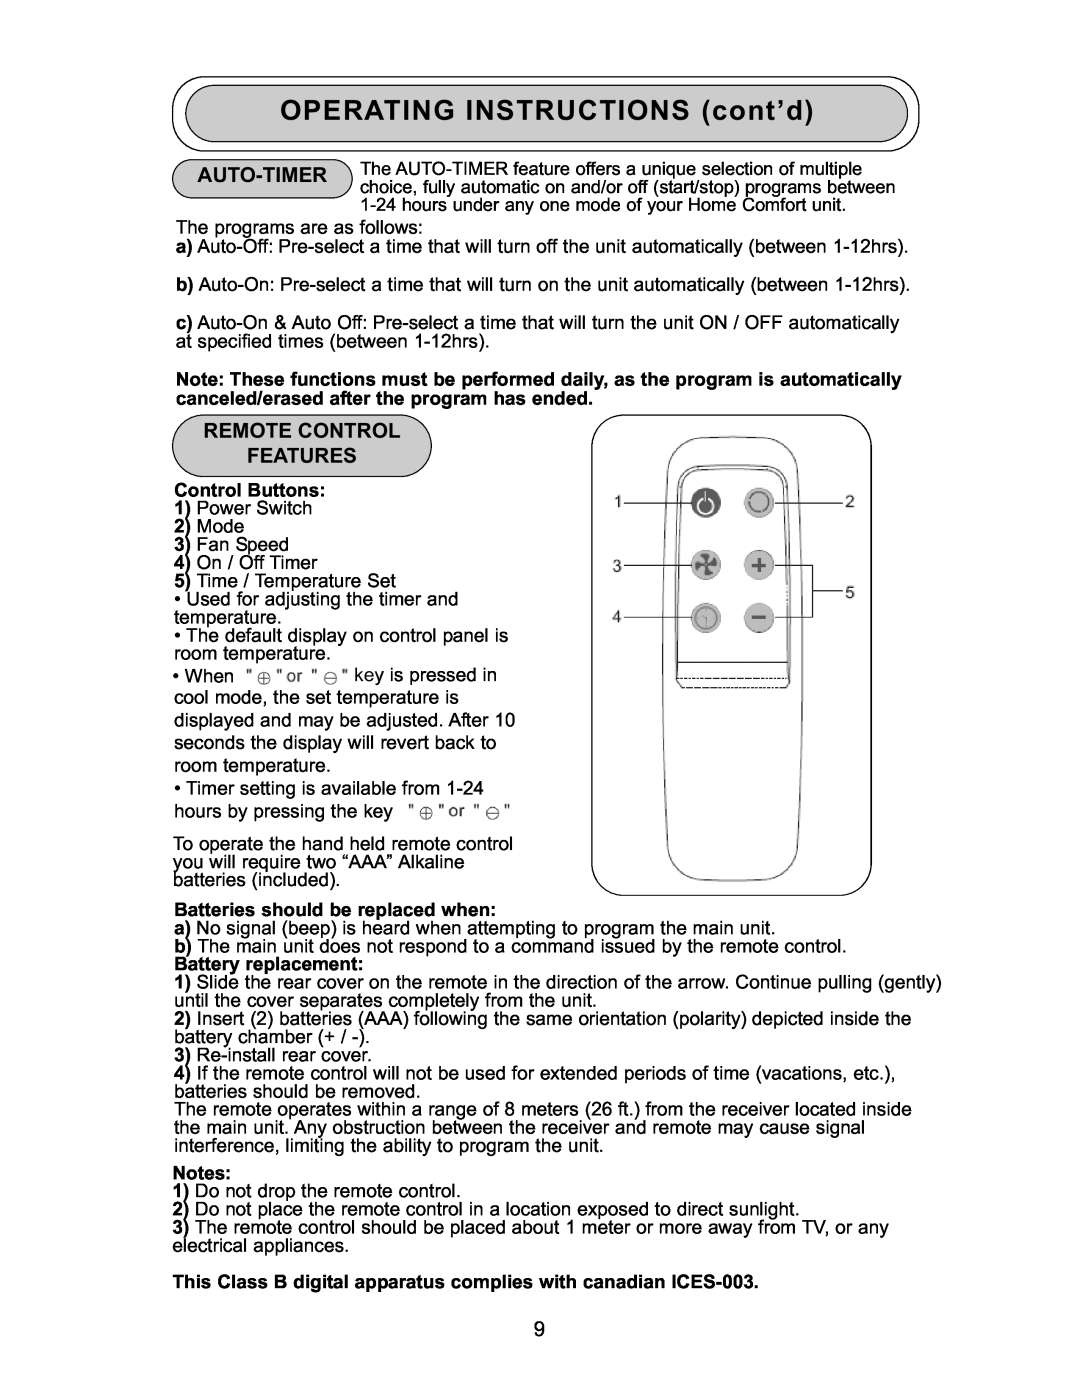 Danby DPAC 9009 OPERATING INSTRUCTIONS cont’d, Control Buttons, Batteries should be replaced when, Battery replacement 